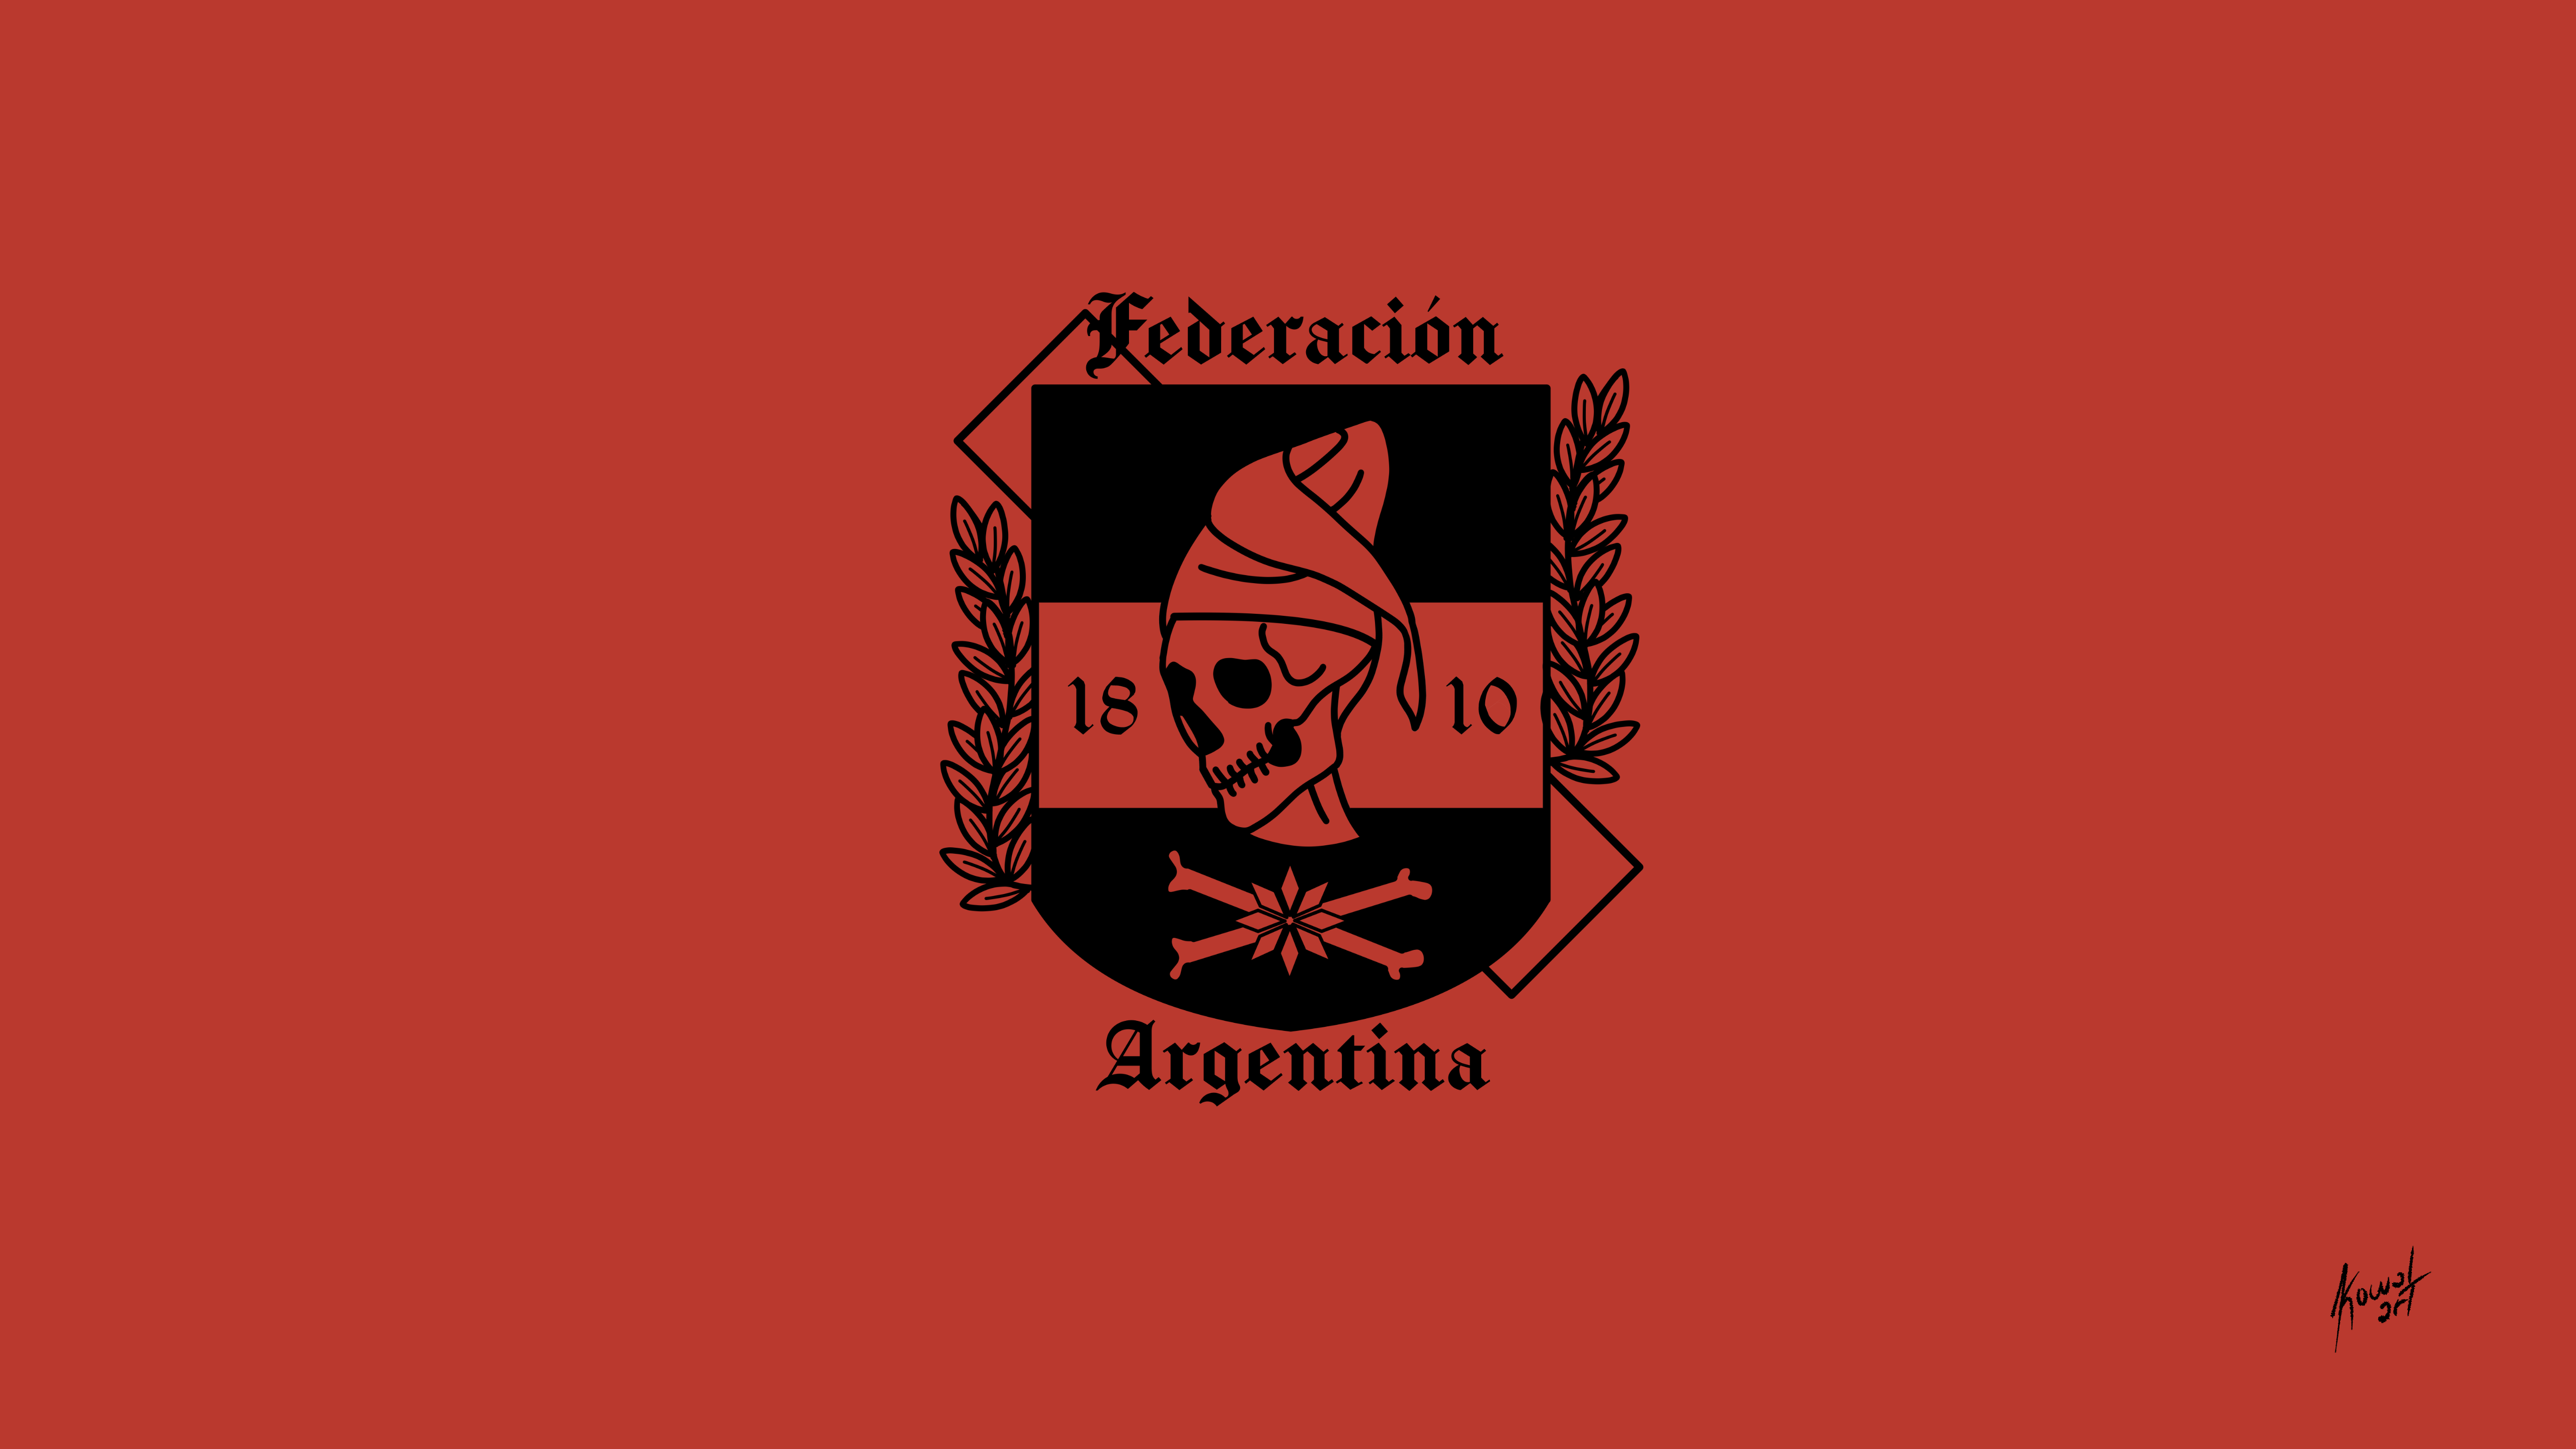 General 5120x2880 military war simple background Argentina skull and bones minimalism red background logo